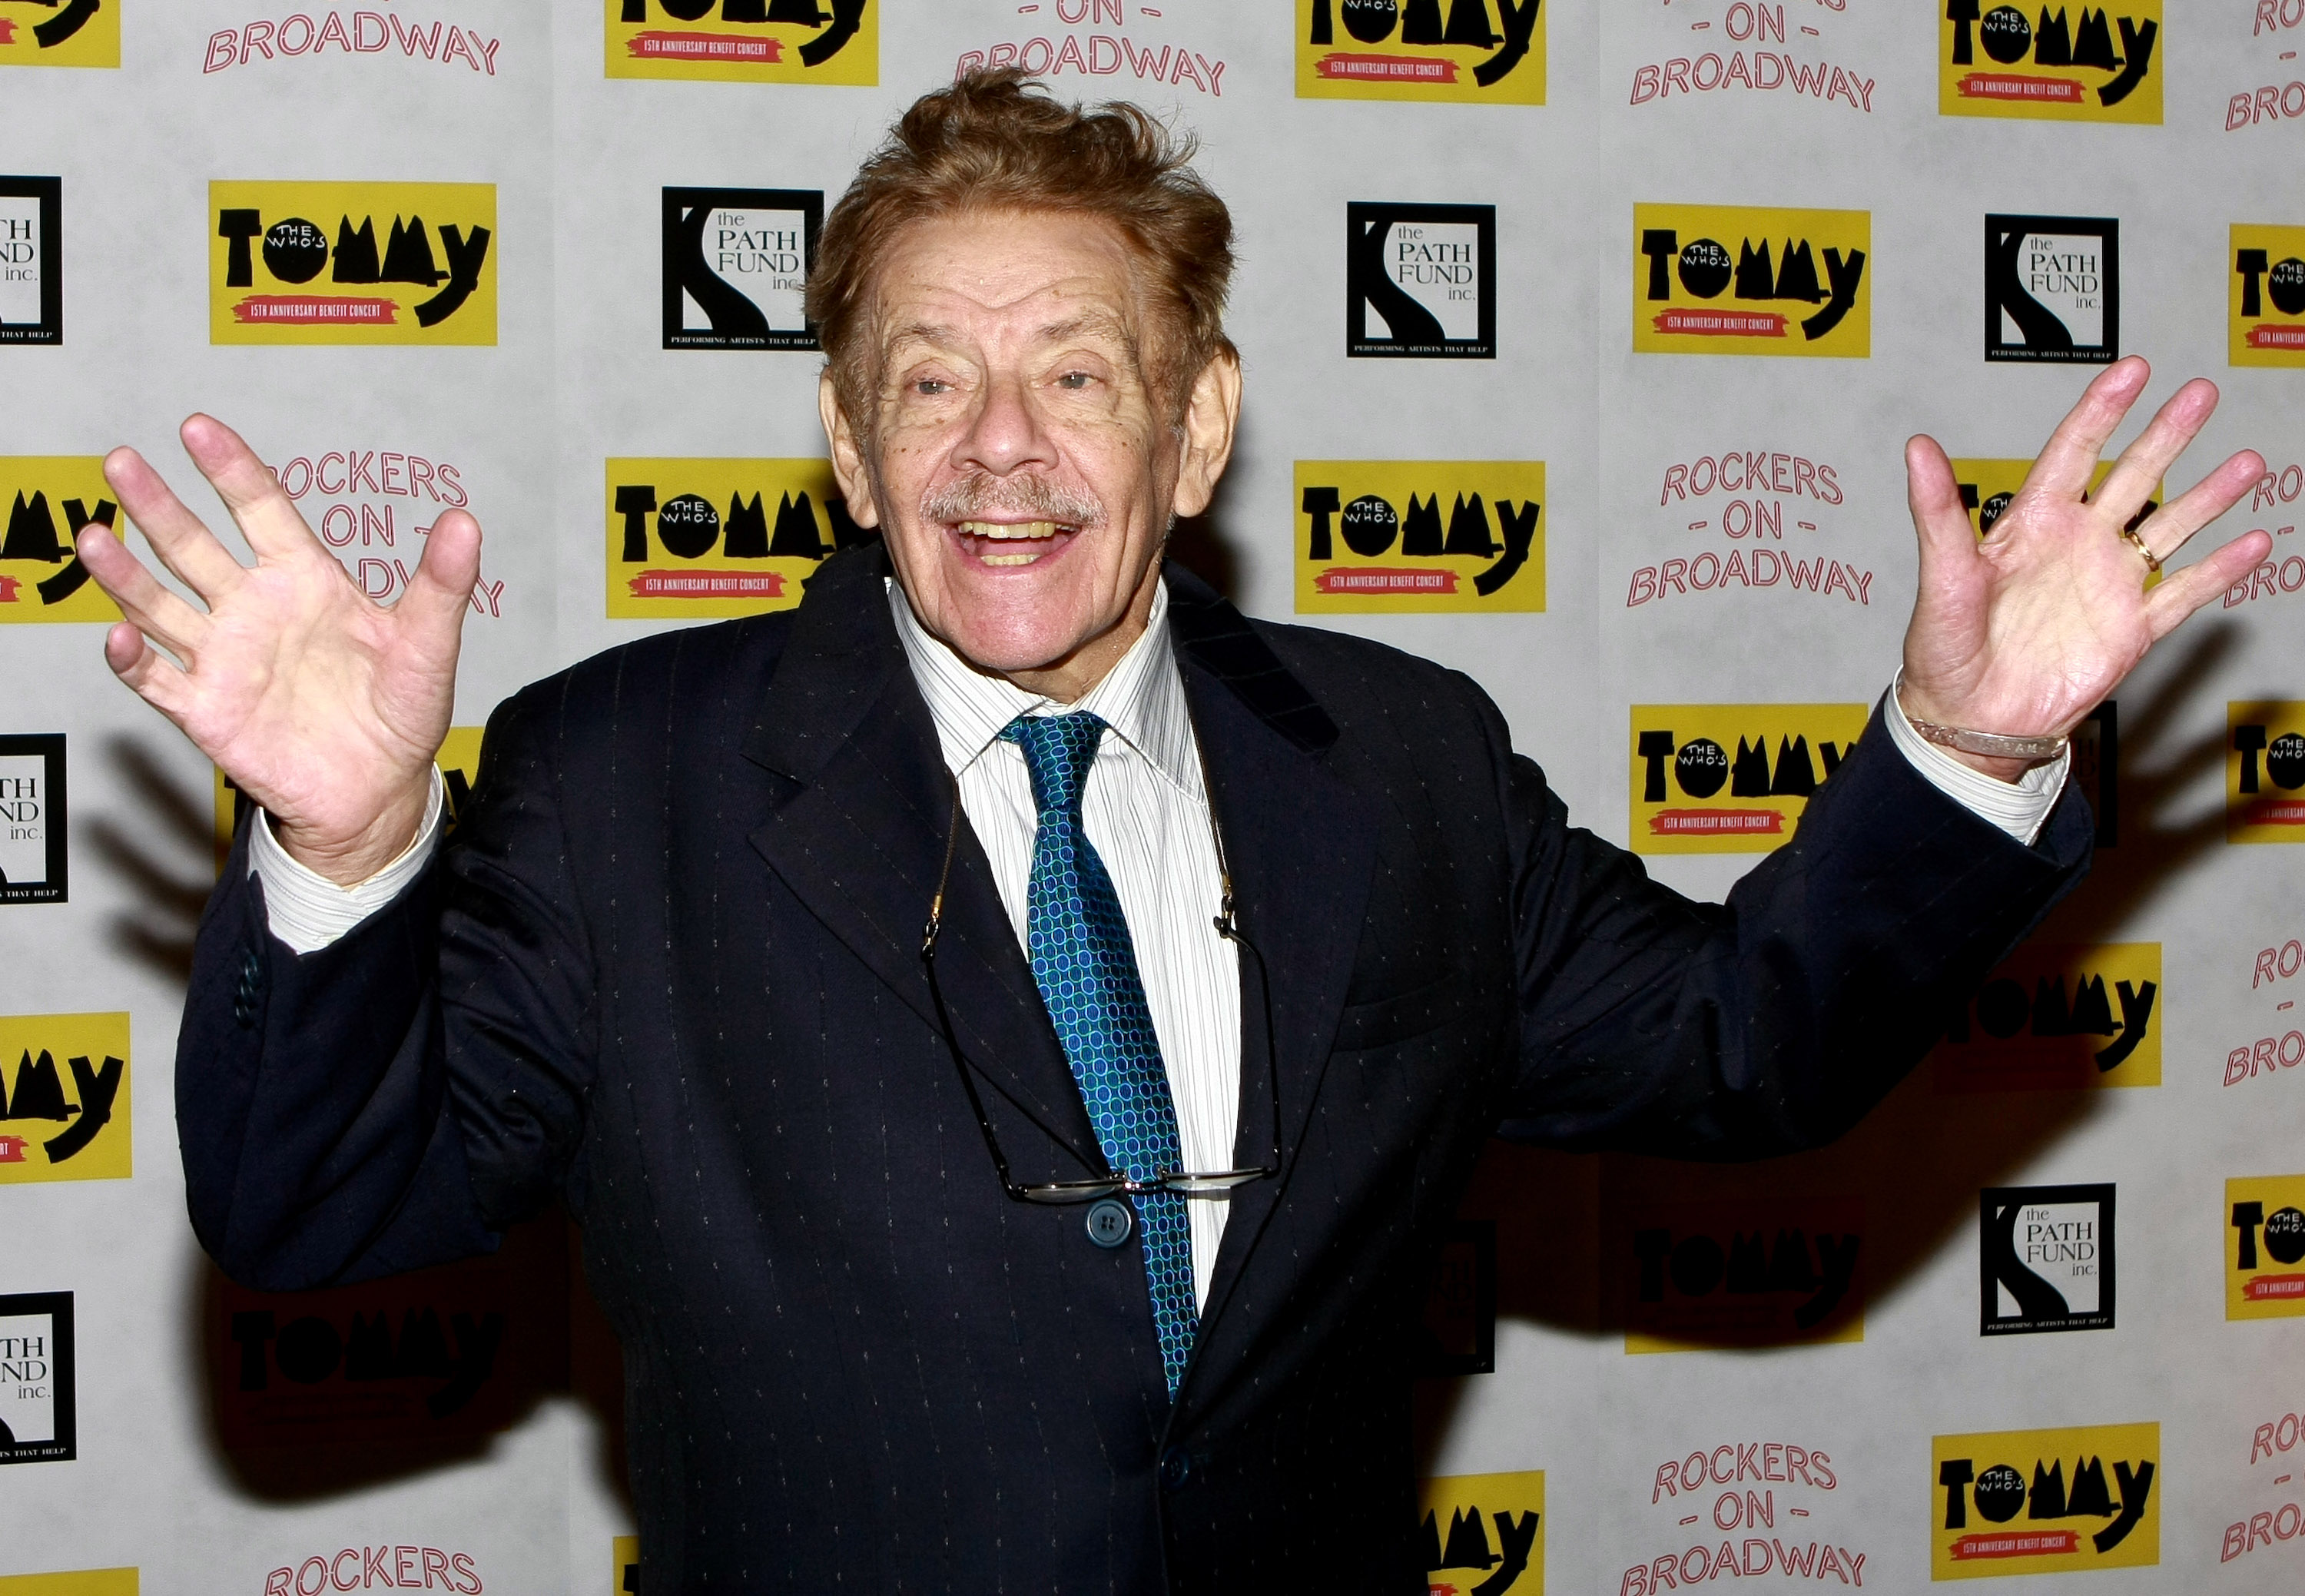 Jerry Stiller at "The Who's Tommy" 15th Anniversary Concert in New York City on December 15, 2008. | Source: Getty Images